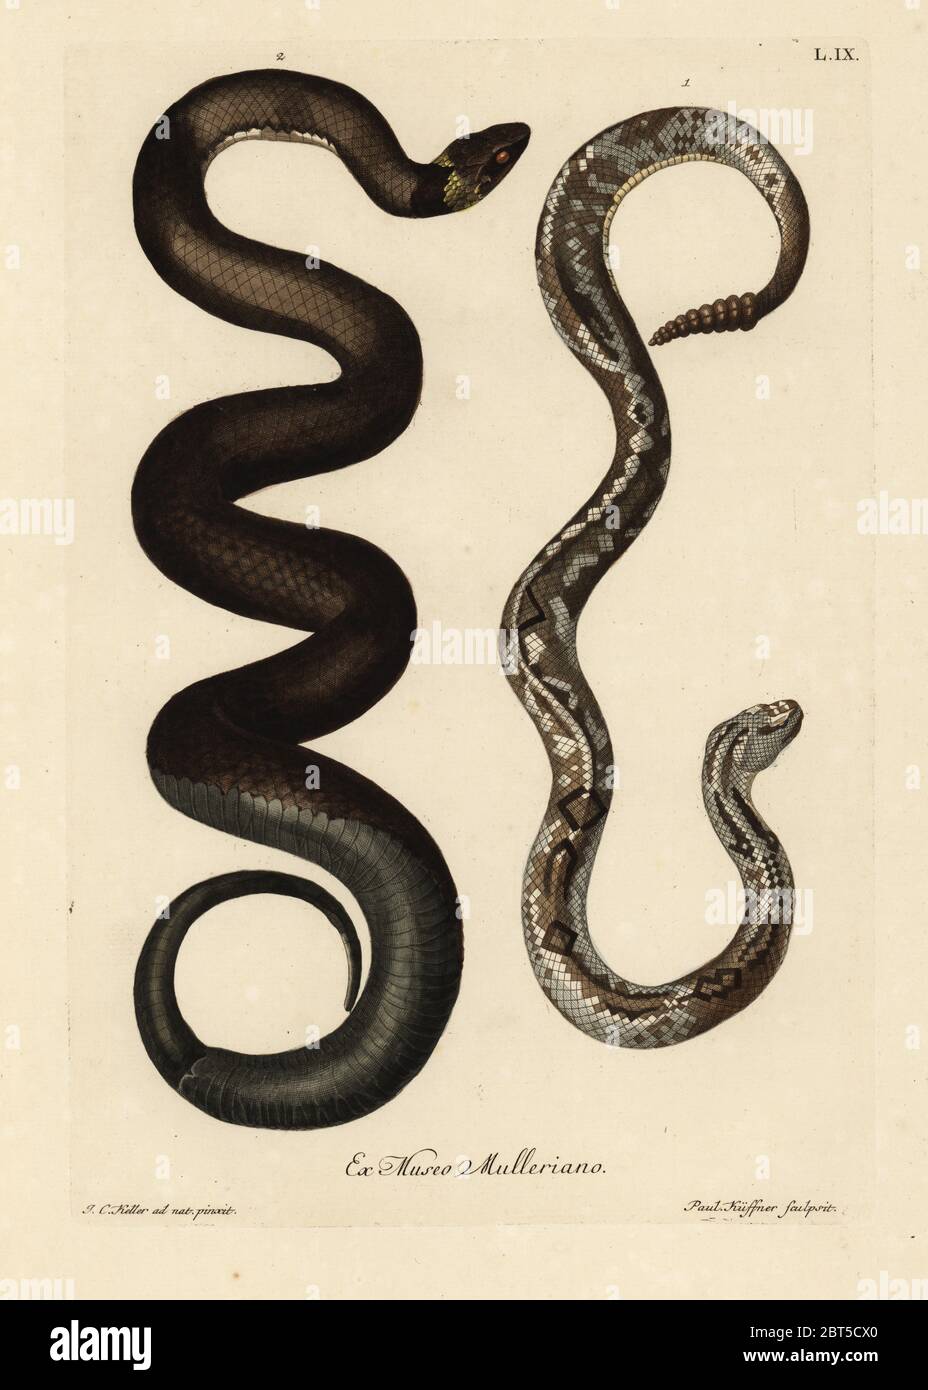 South American rattlesnake, Crotalus durissis, and snake from Boston, New  England. Handcoloured copperplate engraving by Paul Kuffner after an  illustration from nature by Johann Christoph Keller from Georg Wolfgang  Knorr's Deliciae Naturae